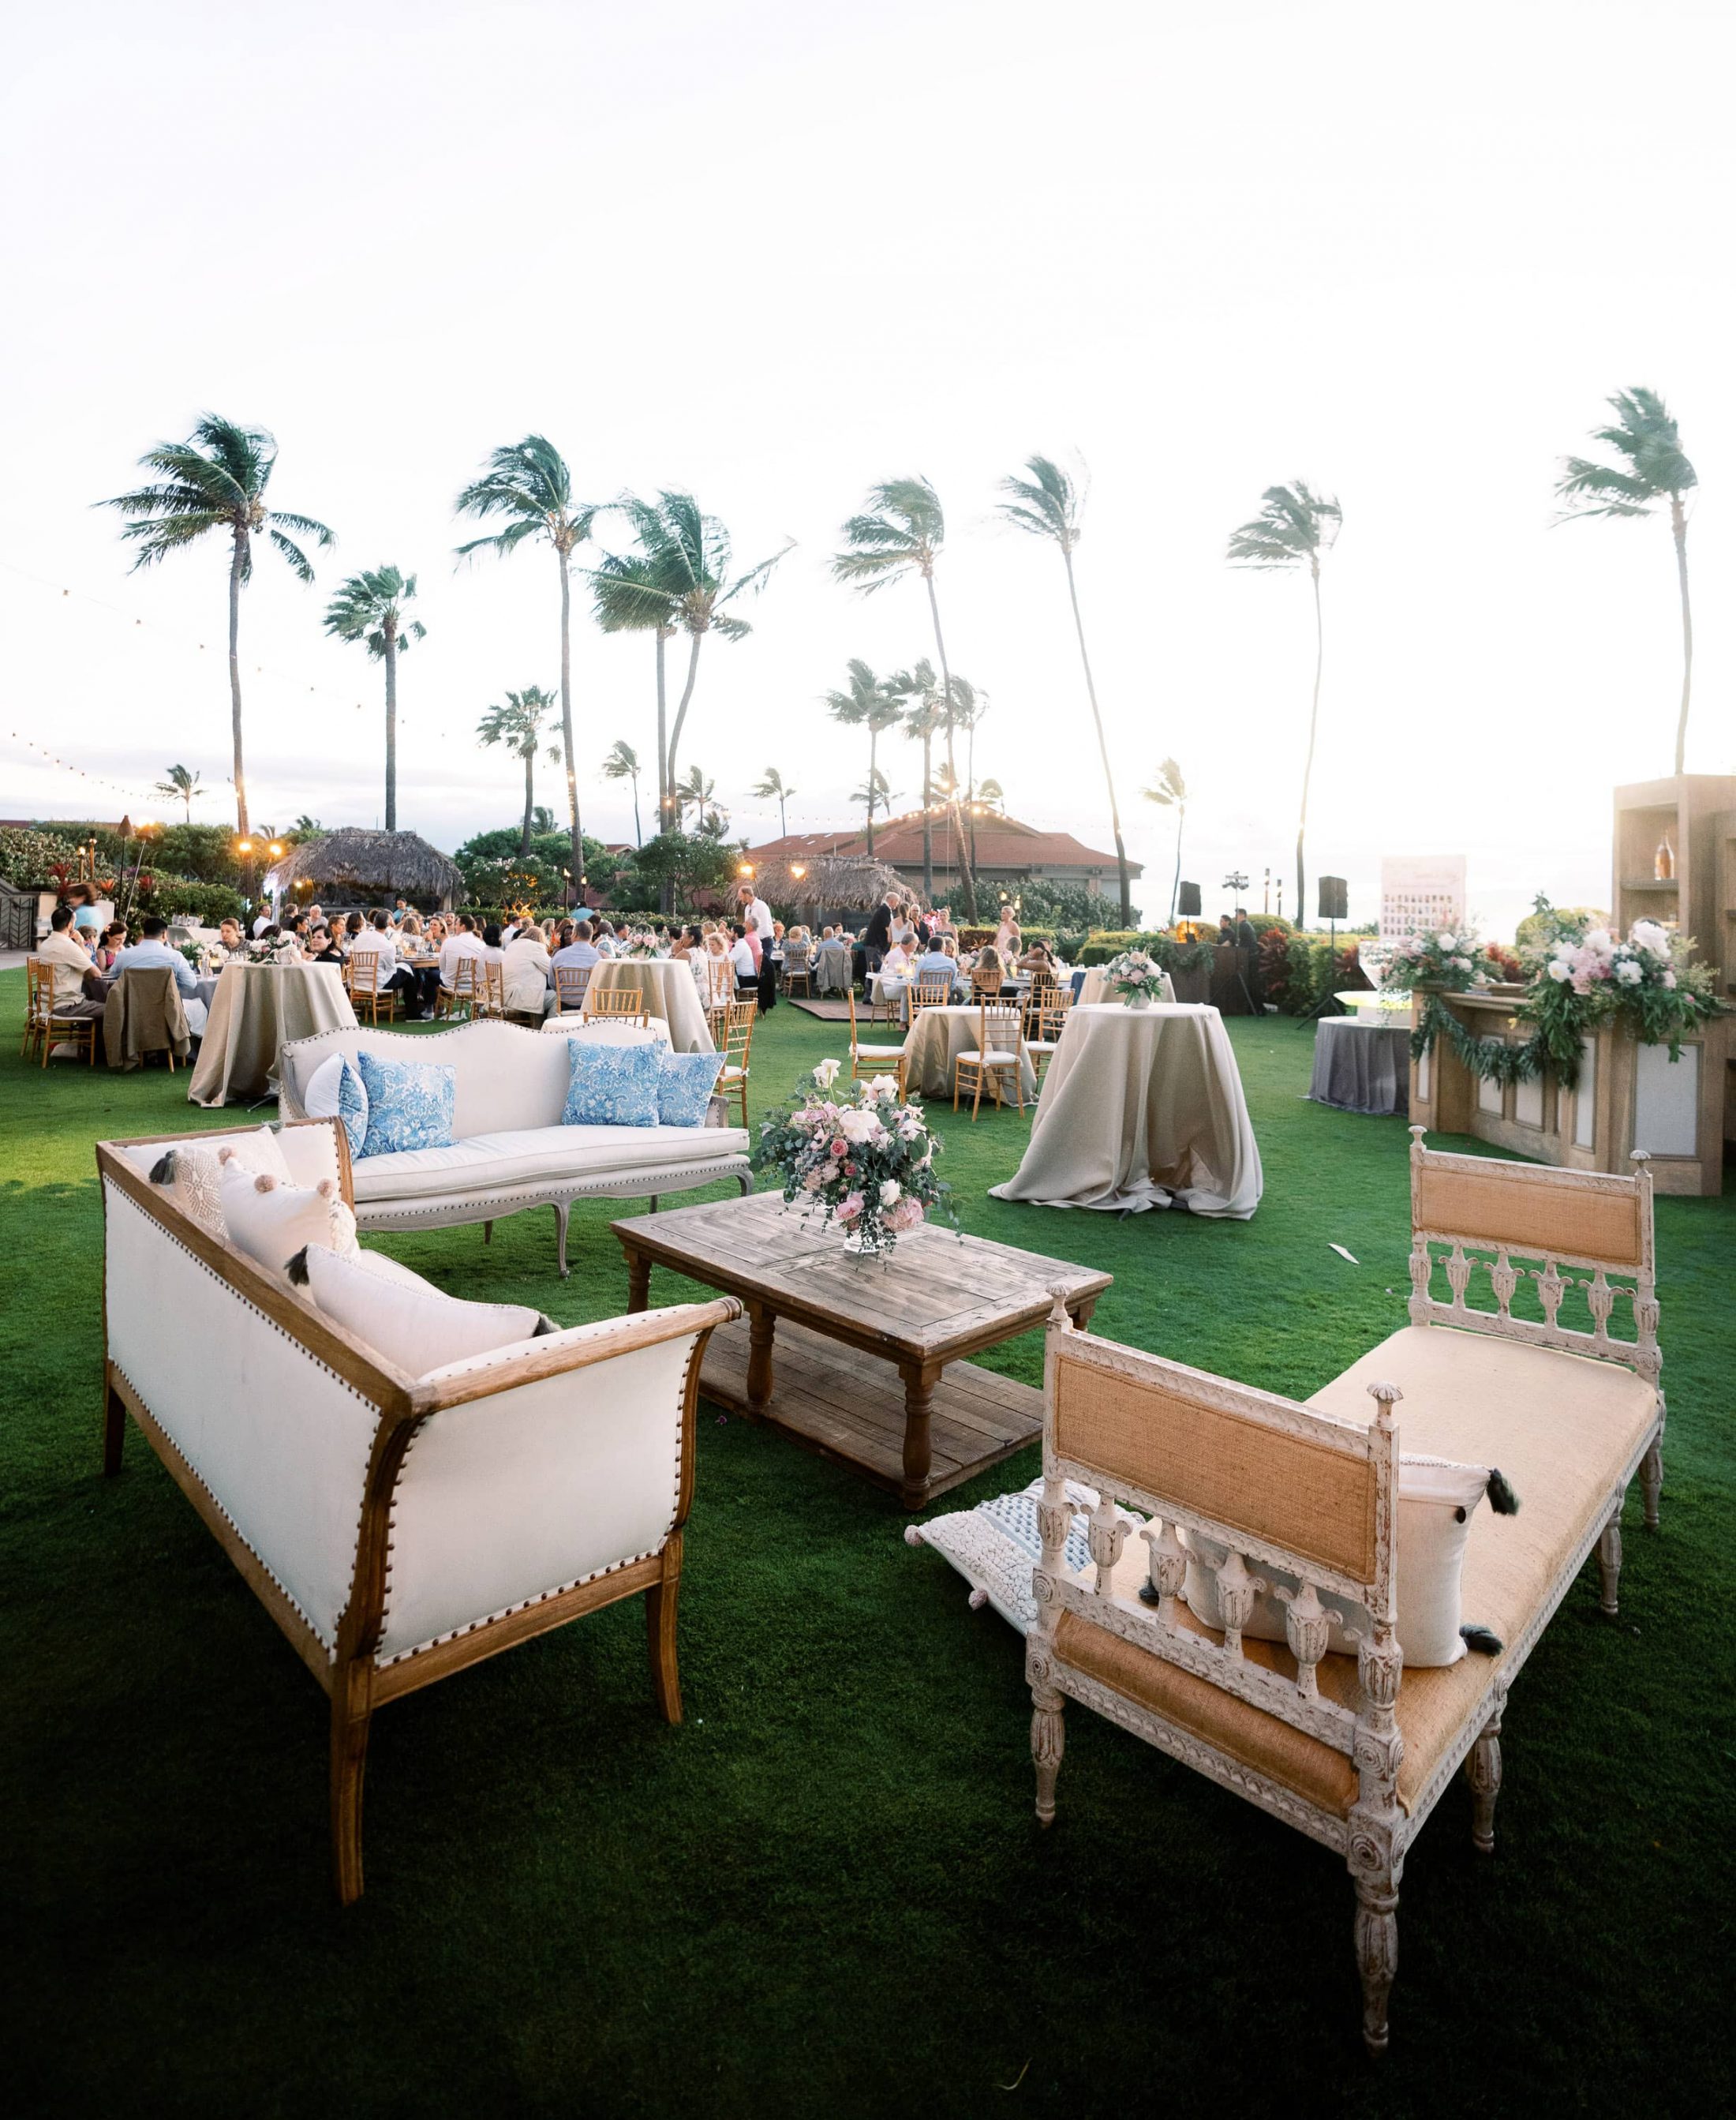 Outdoor reception at Maui wedding at Four Seasons Resort Maui in Wailea, Hawaii | Photo by James x Schulze